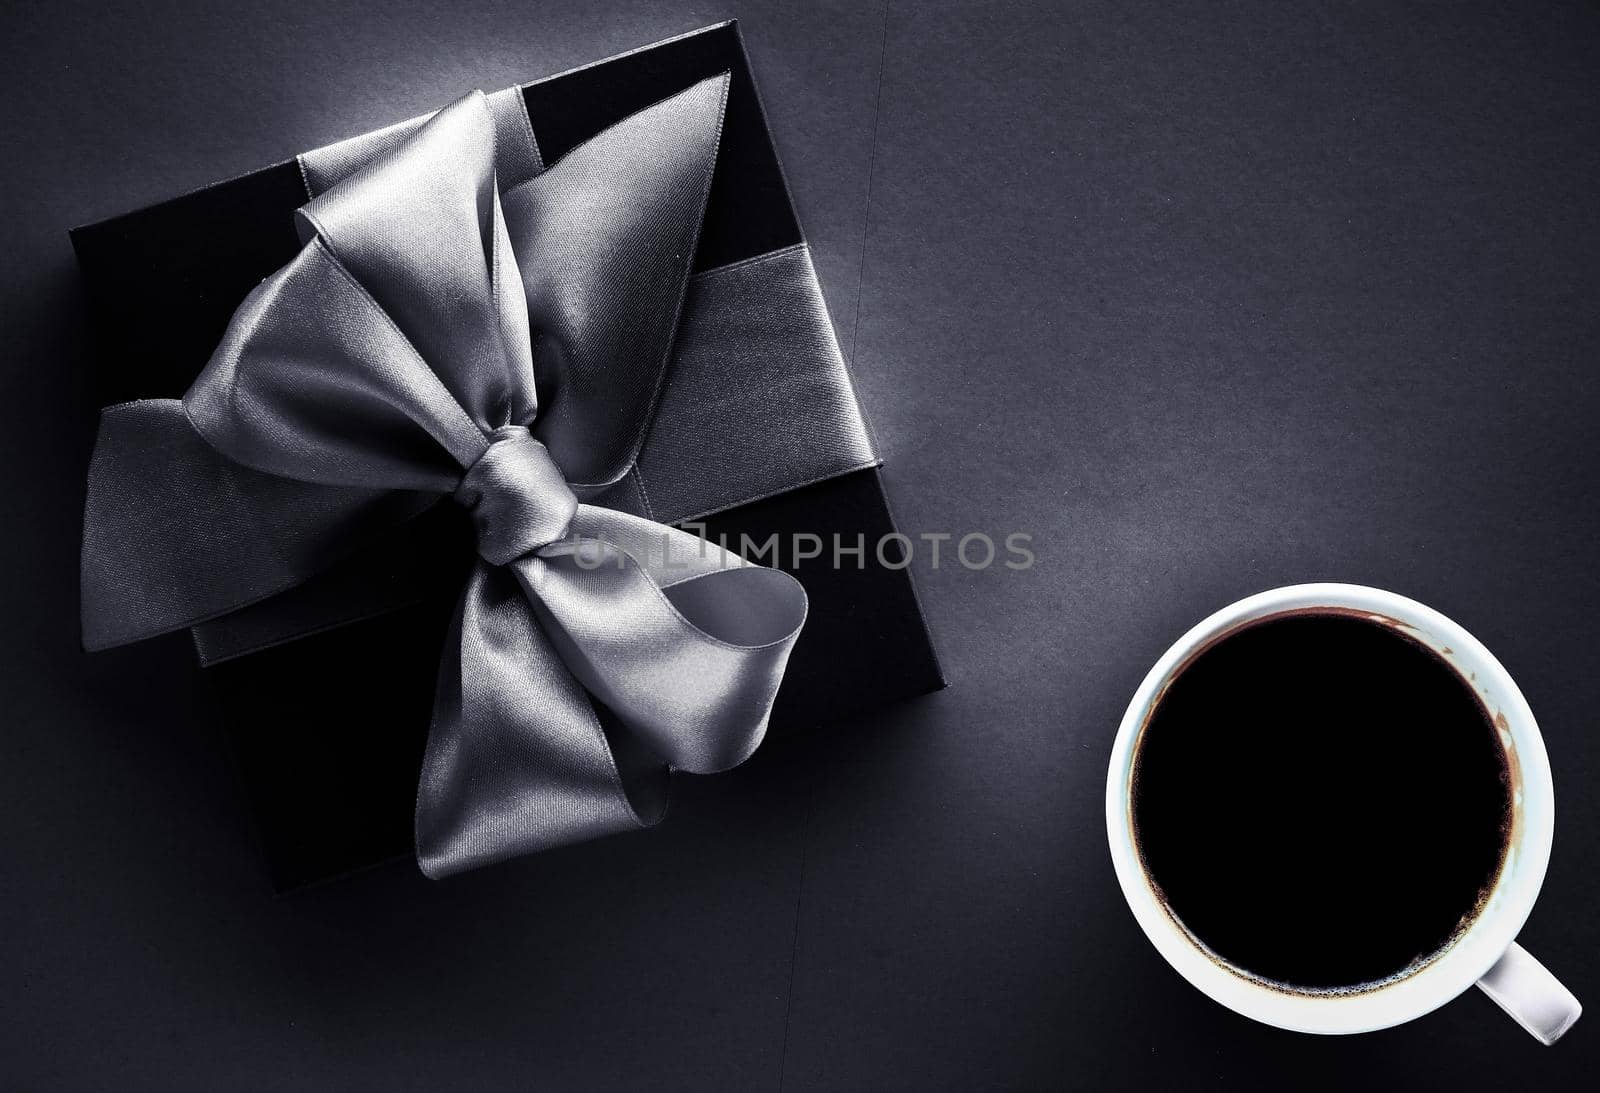 Hot drink, business card design and food branding concept - Luxury coffee brand, cup and gift box on black flatlay background